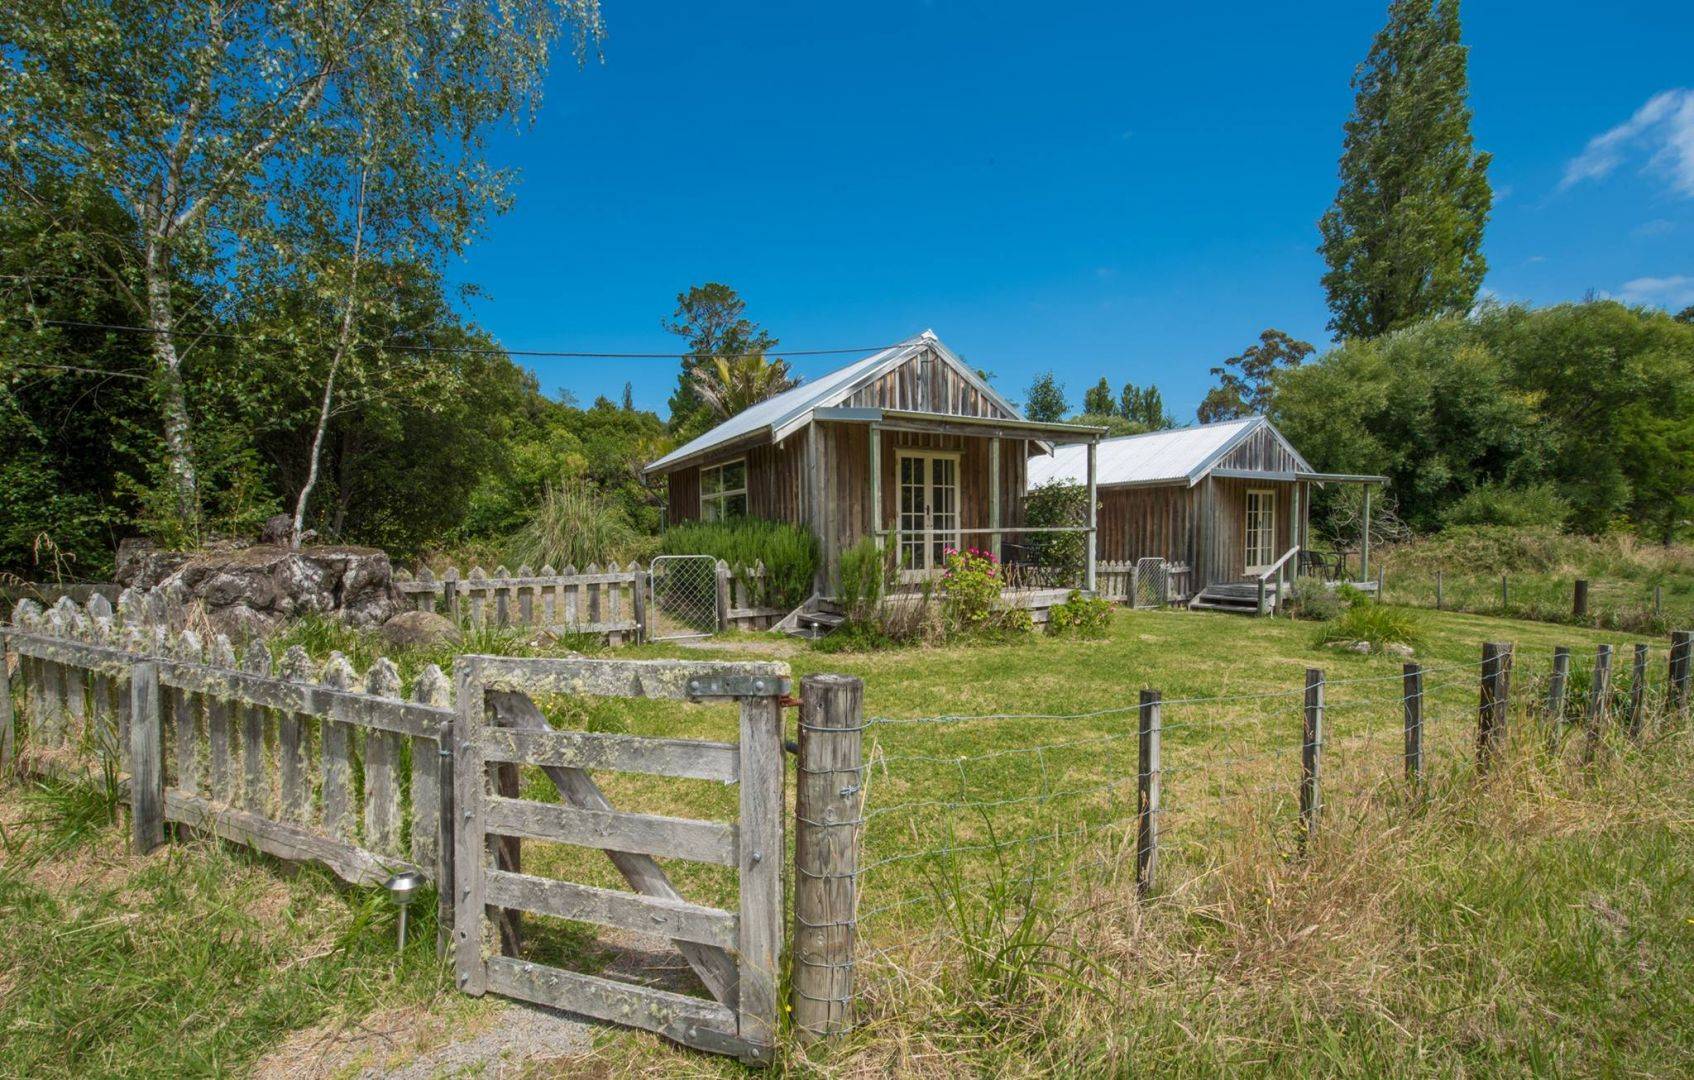 Morere Lodge, Cottages And Cabins For Group Accommodation In Gisborne